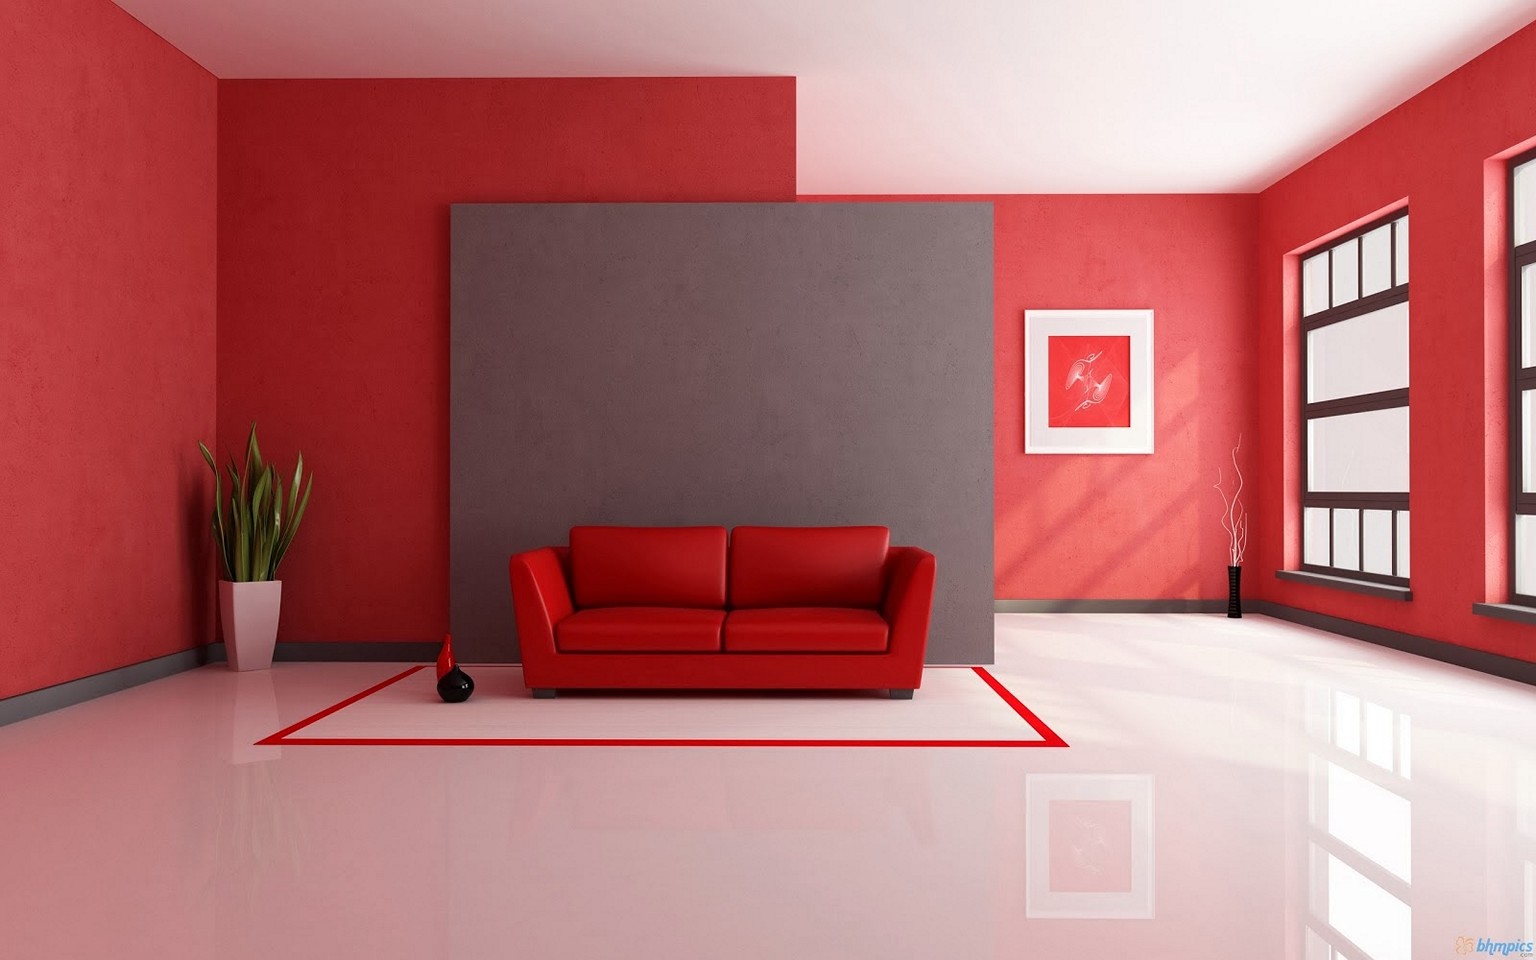 Red leather couch in a living room